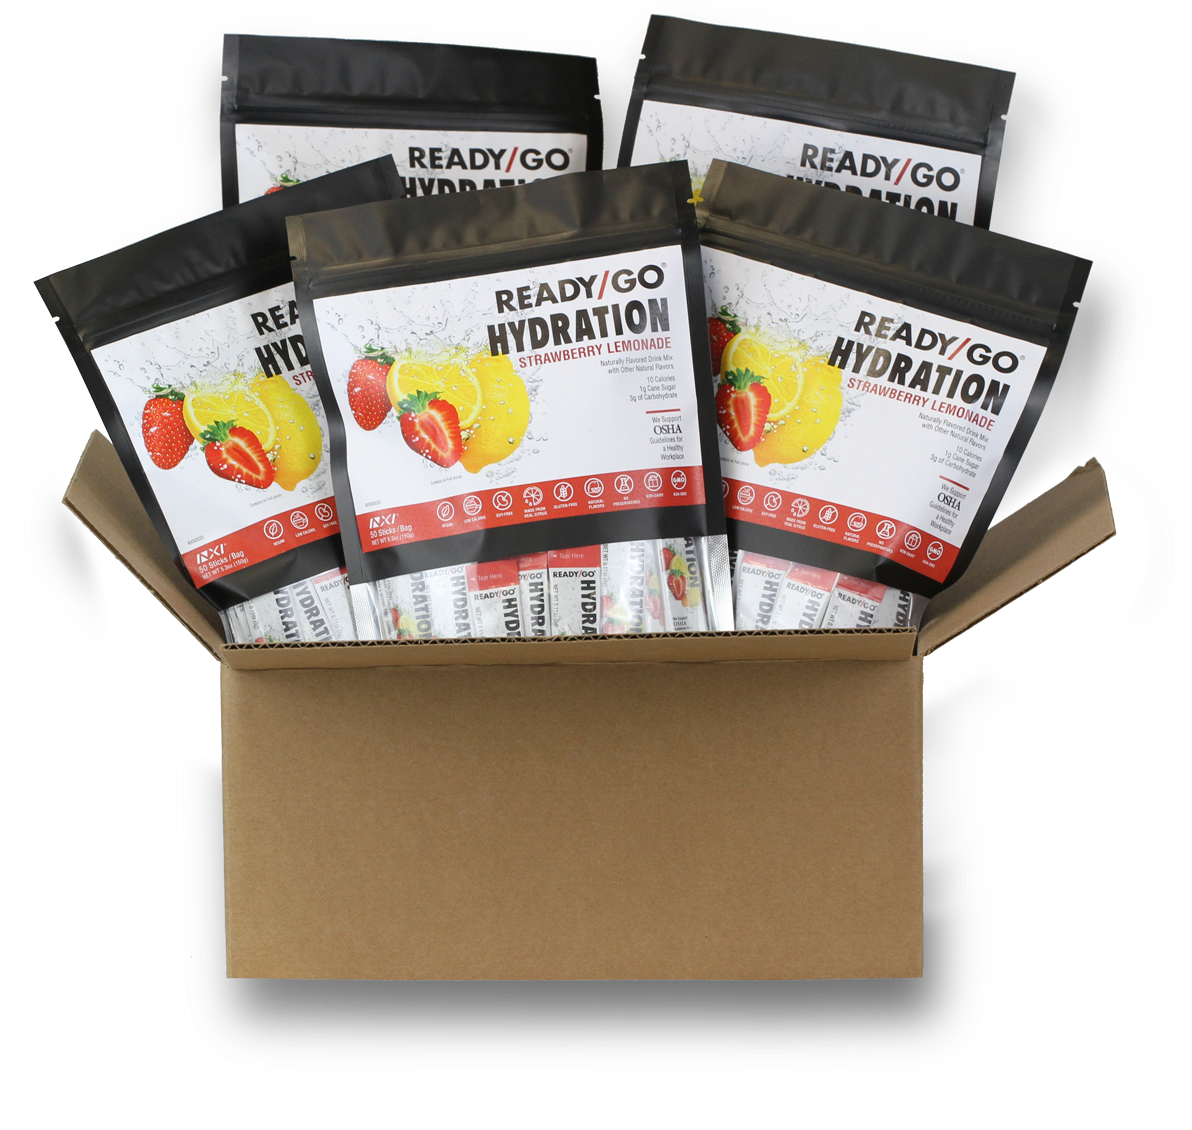 A Ready/Go® Hydration Distributor Welcome Pack including 5, 50 stick bags of each of 4 flavors.